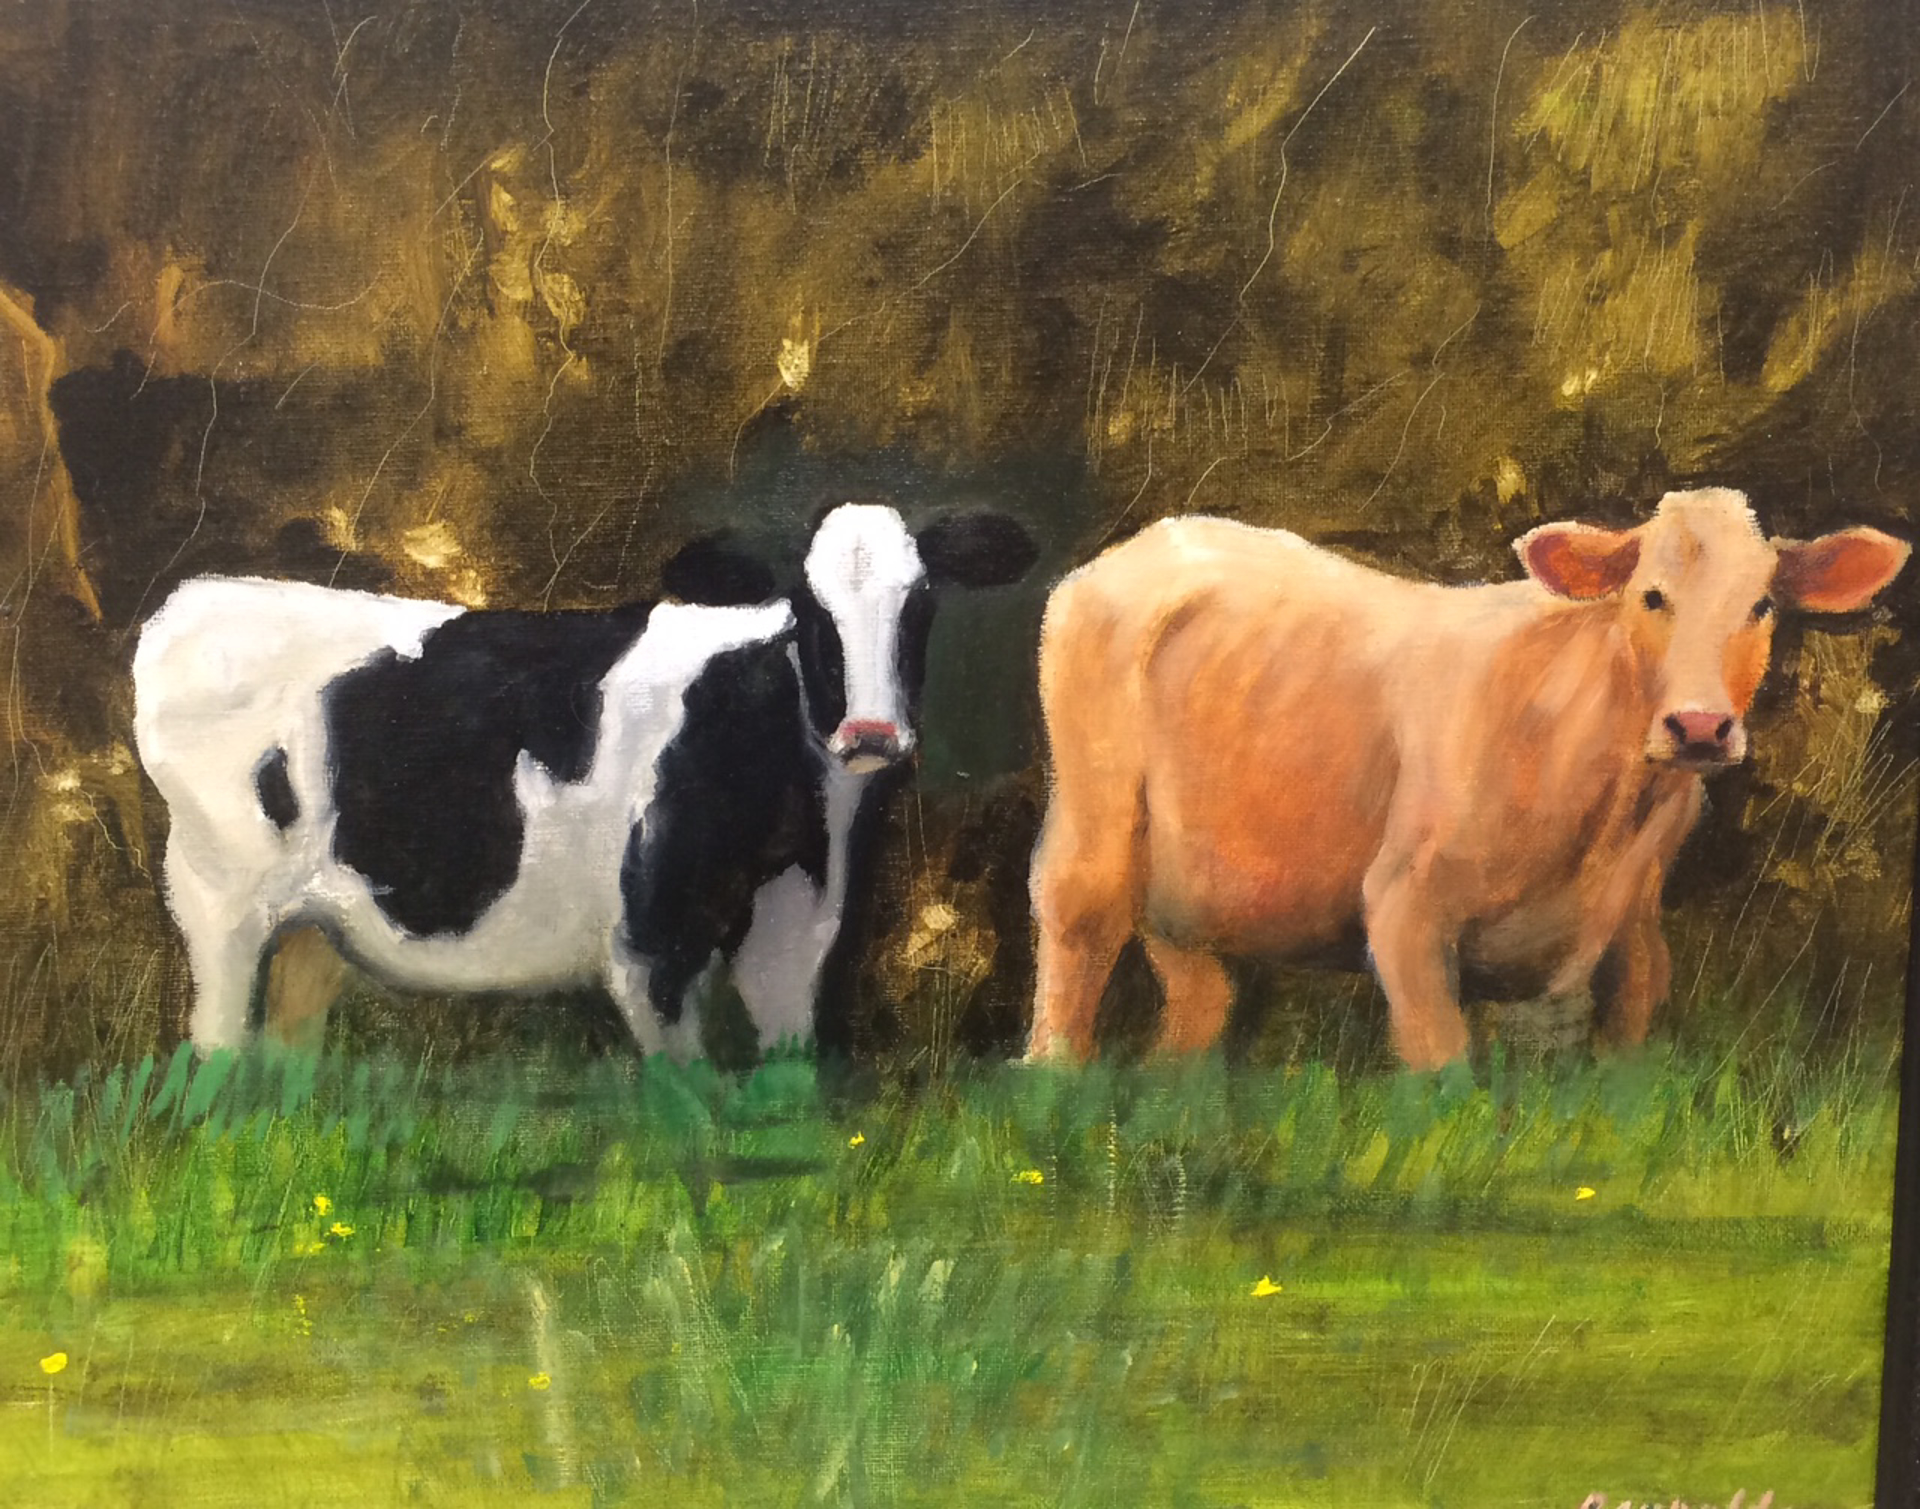 Cows In Pasture by John Reynolds